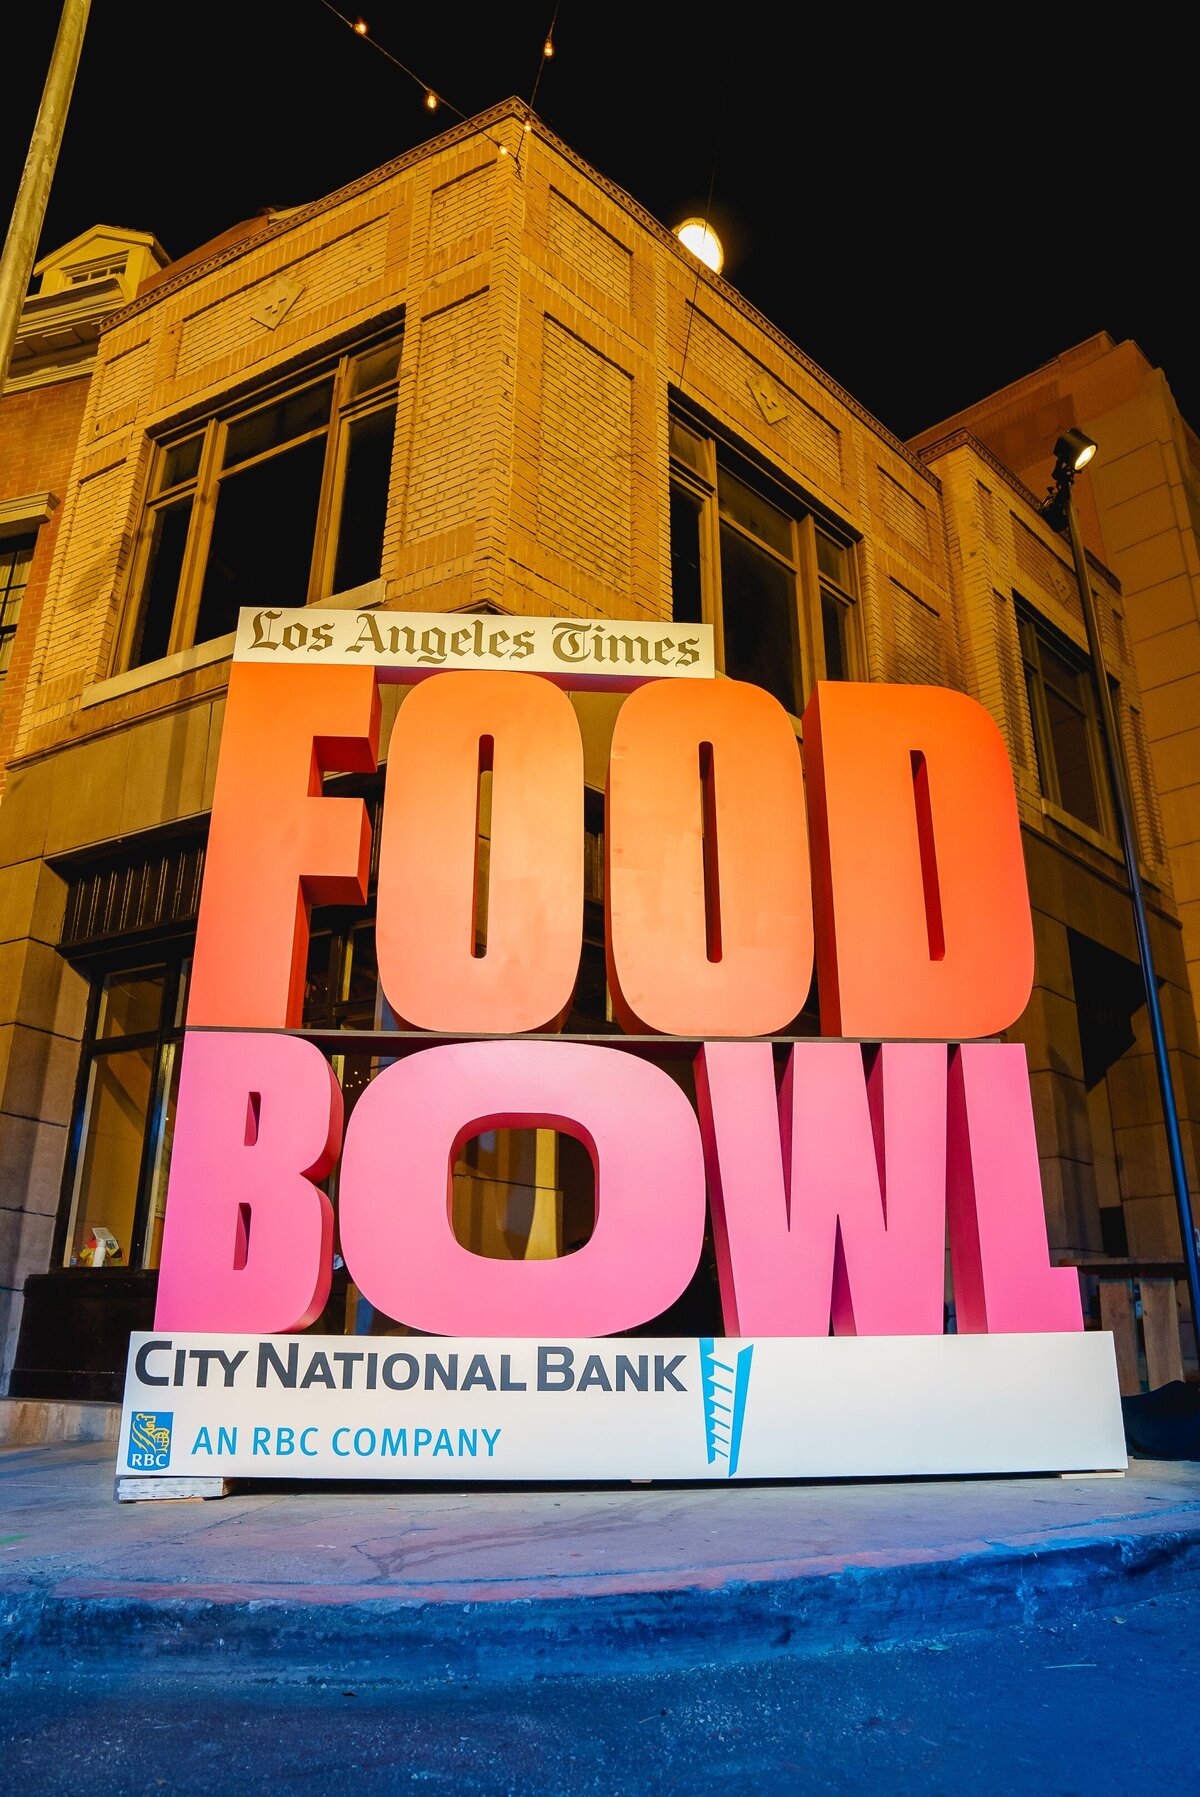 Los Angeles Times Food Bowl Case Study